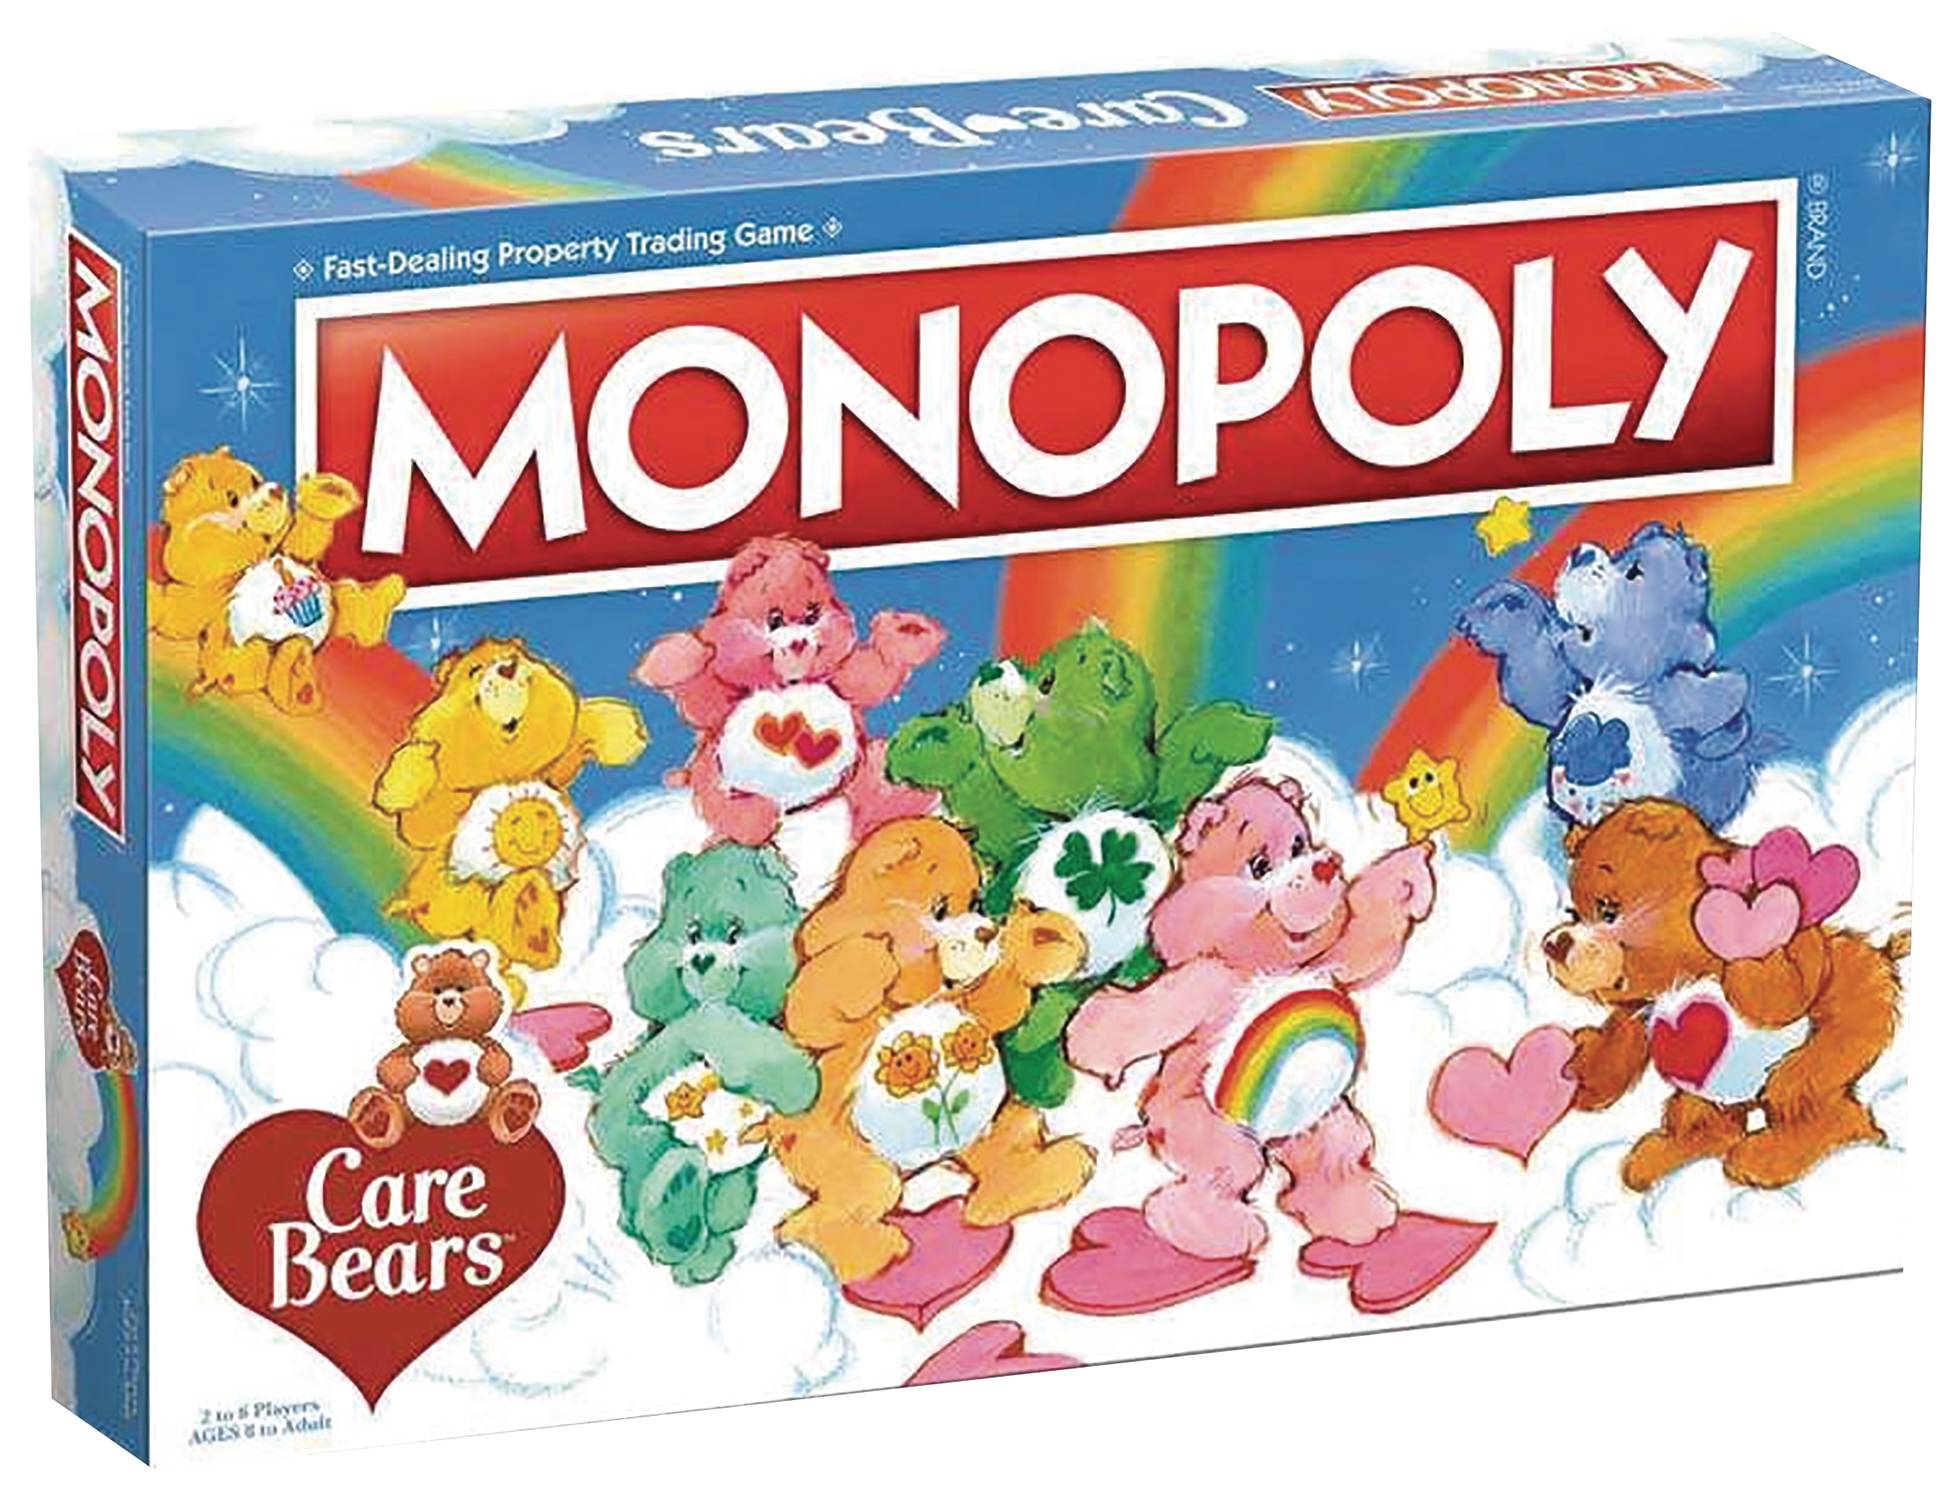 MONOPOLY CARE BEARS ED BOARDGAME (C: 0-1-2) | L.A. Mood Comics and Games